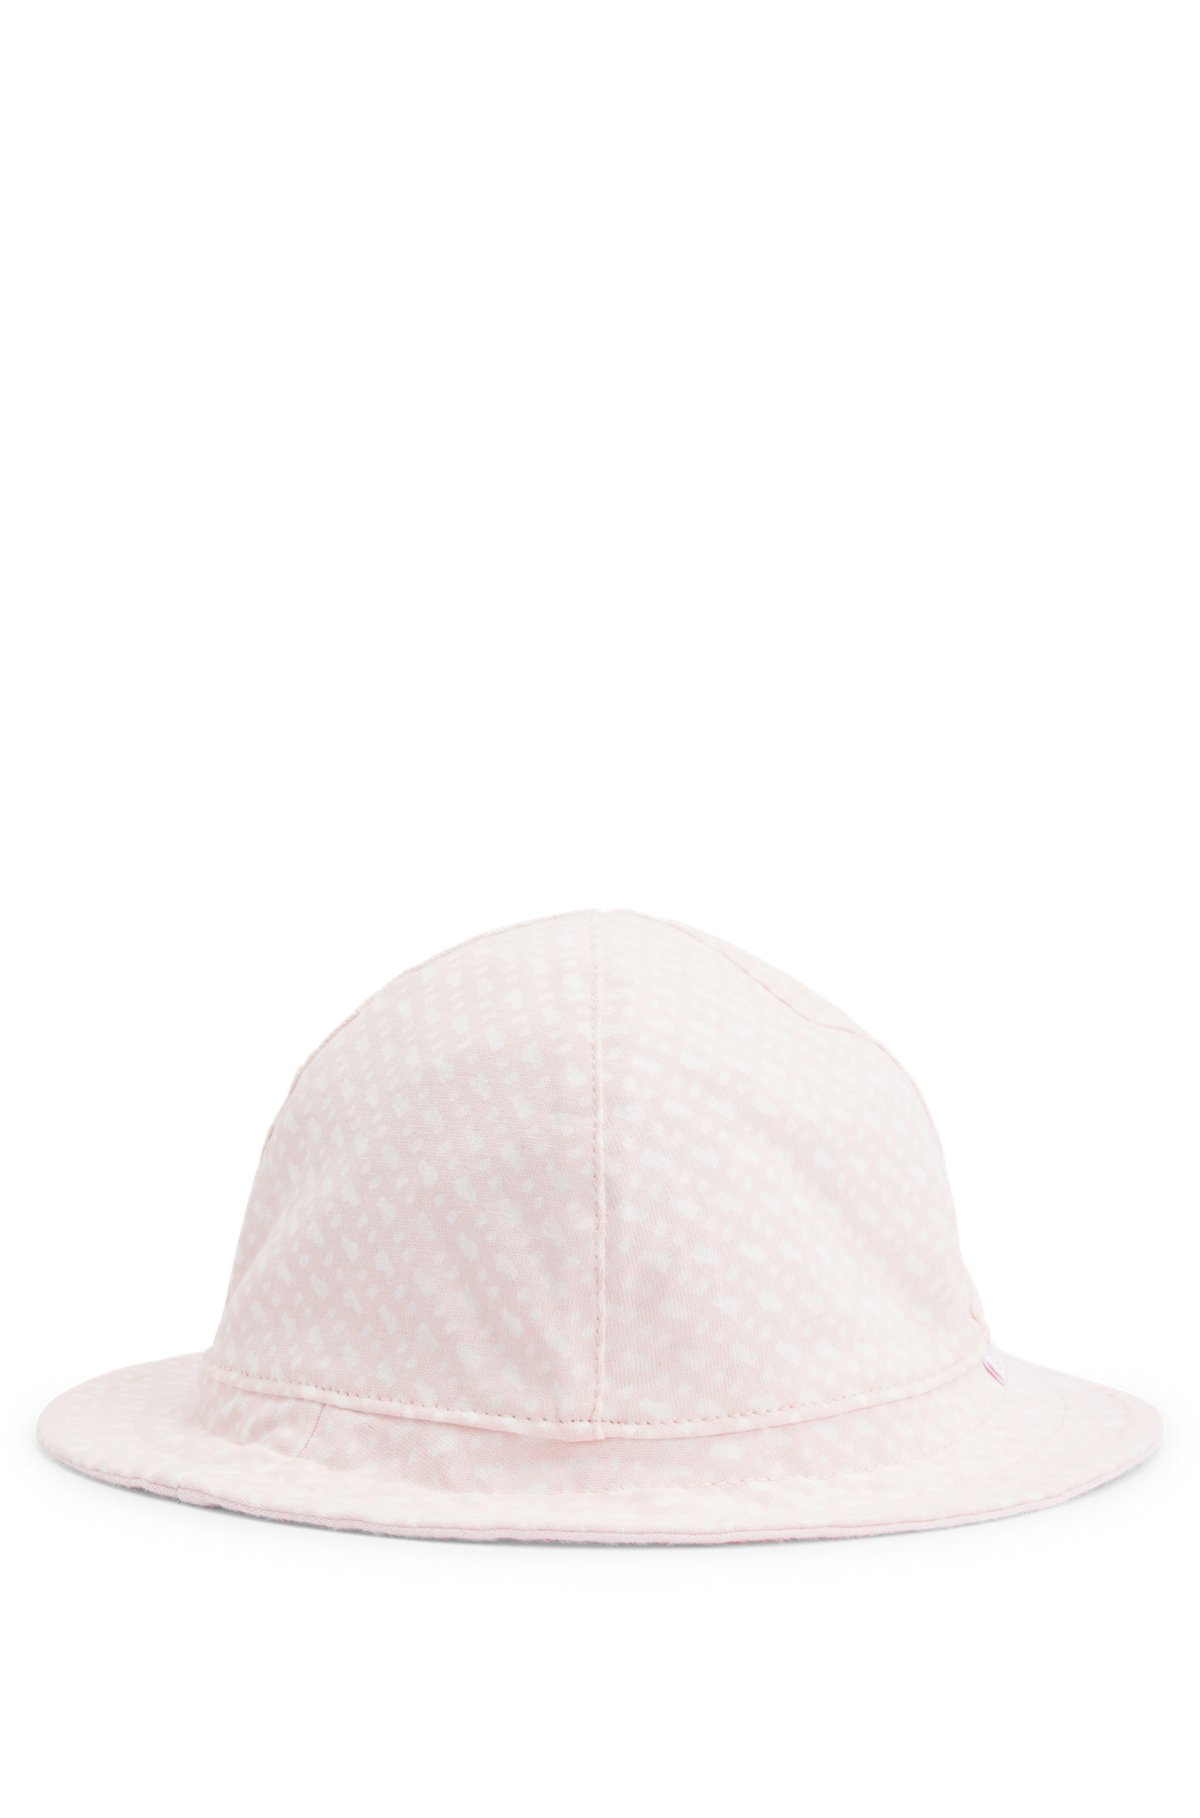 Baby reversible jersey hat with logo details, light pink